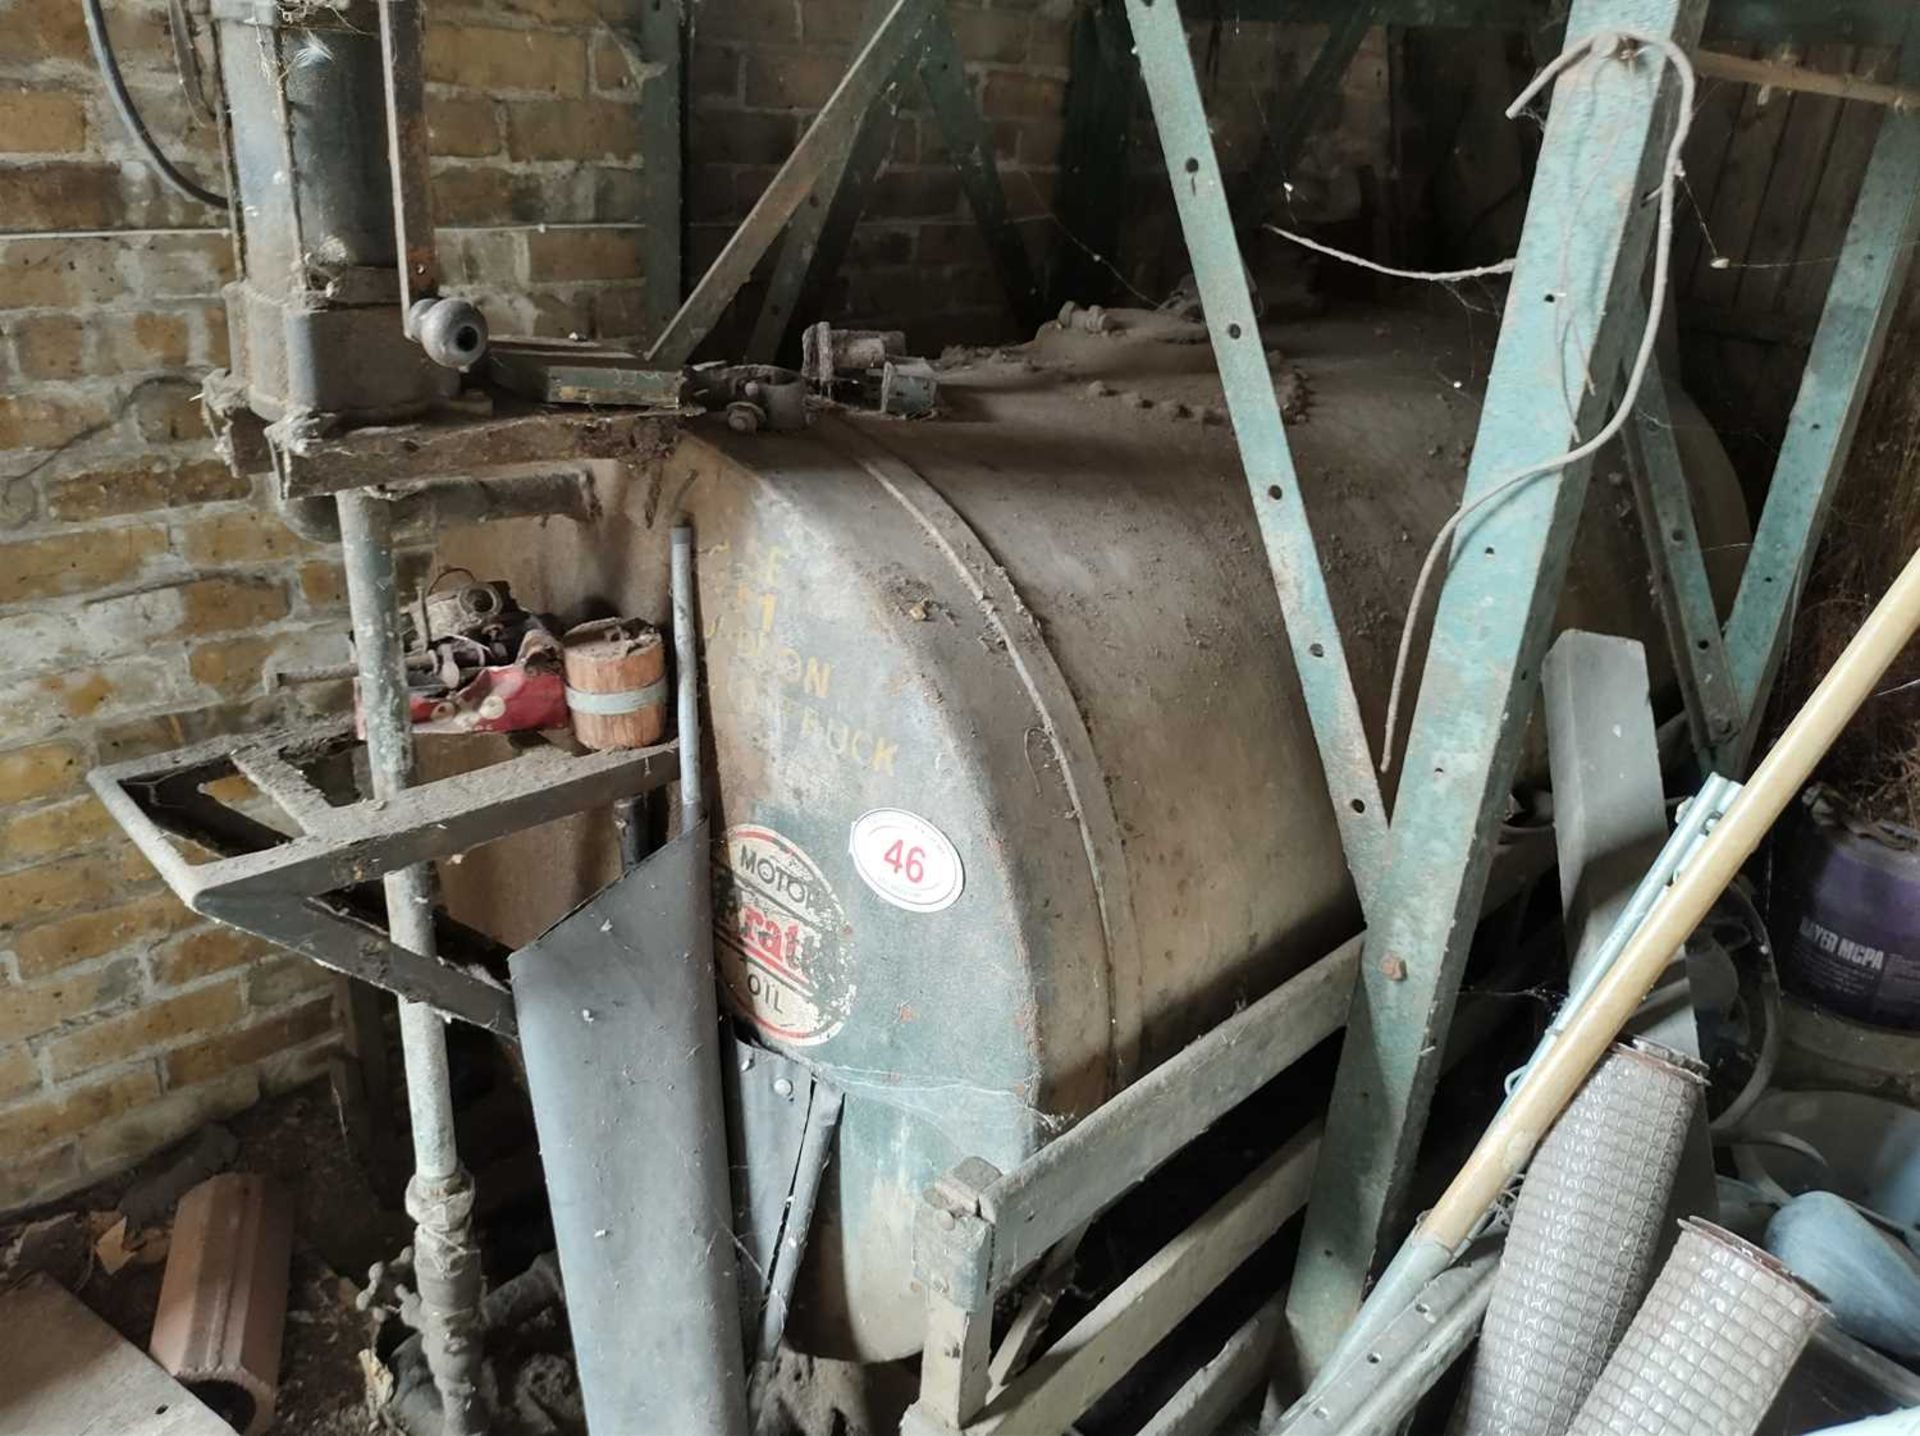 Oil Tank with Pump